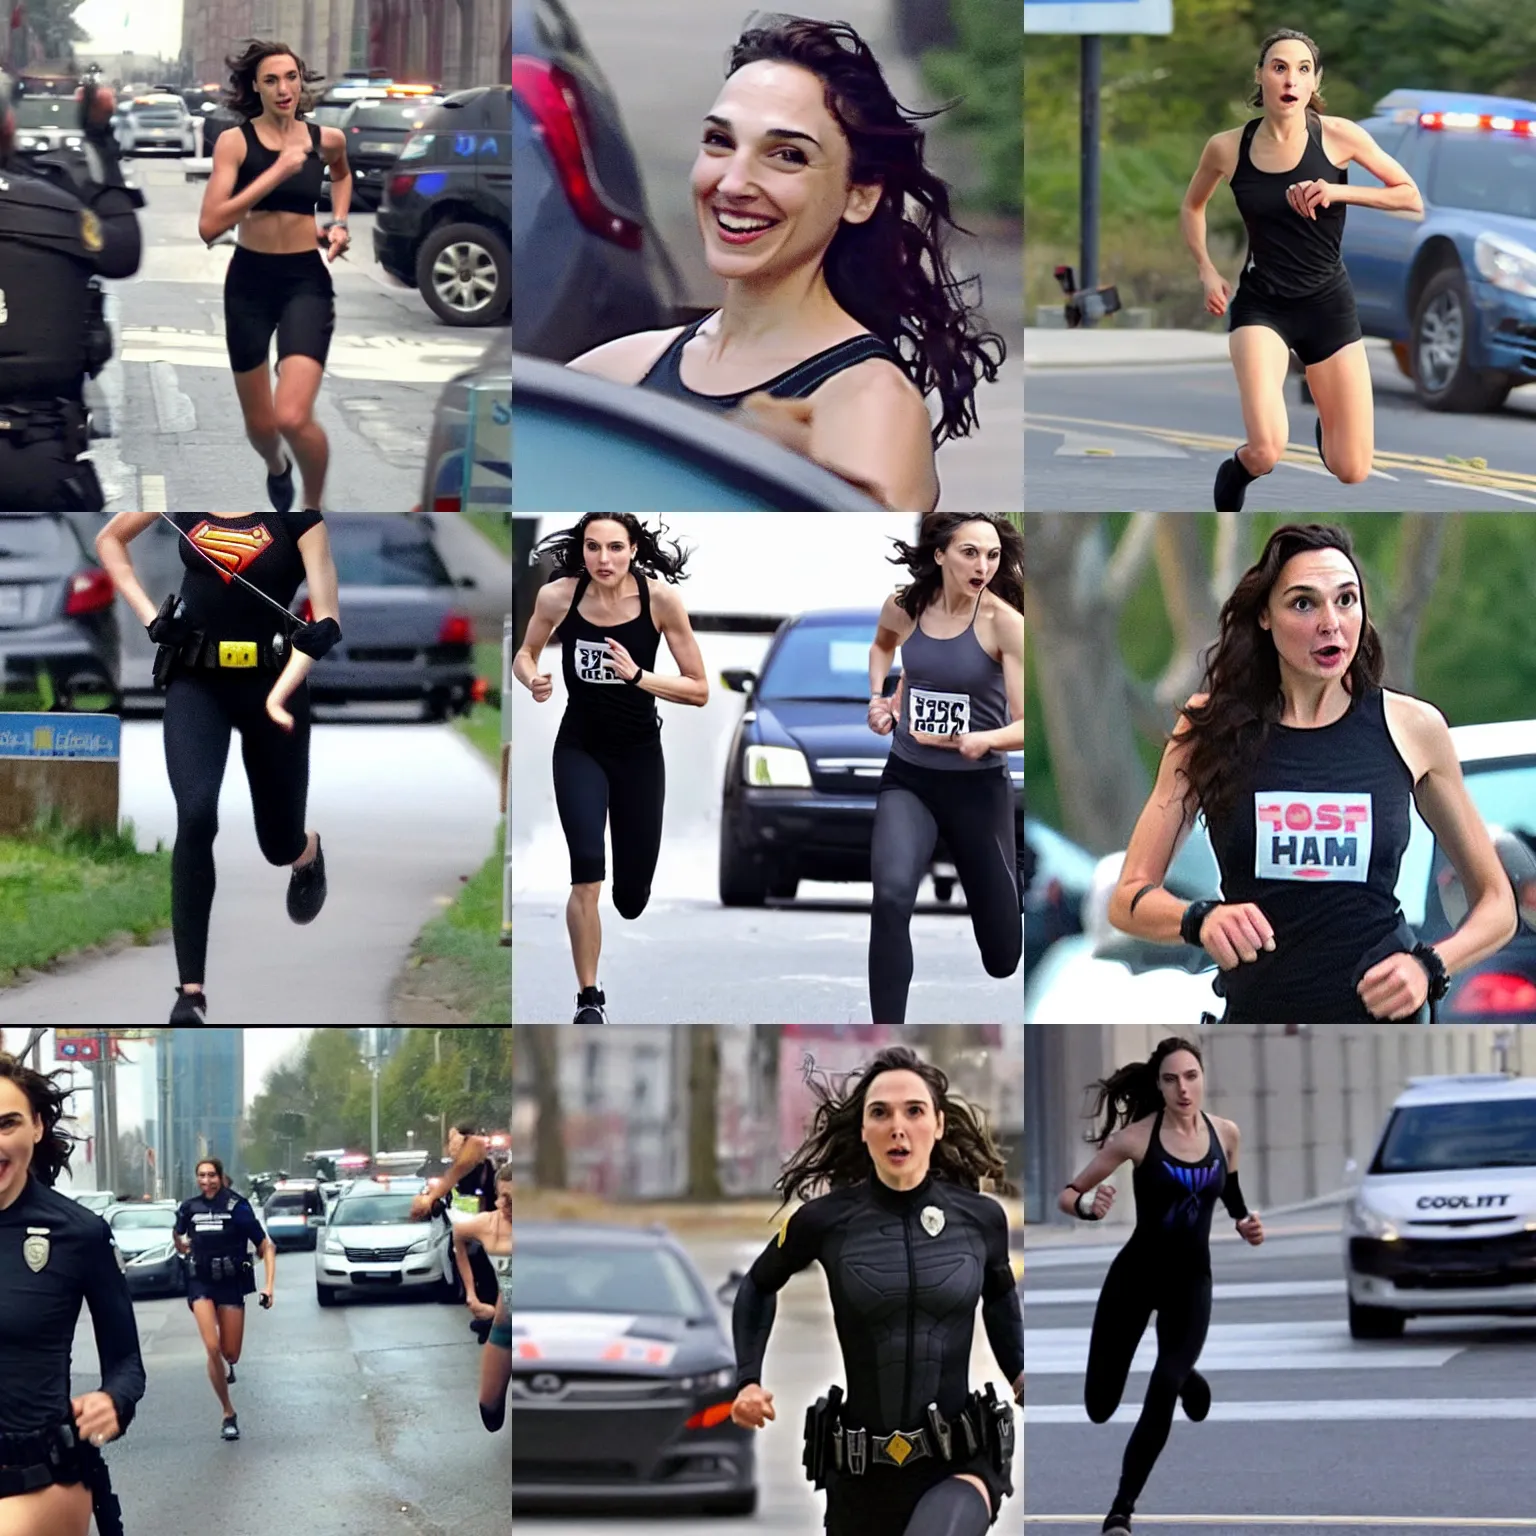 Prompt: dash cam footage gal gadot running from the cops dash cam footage gal gadot running from the cops dash cam footage gal gadot running from the cops dash cam footage gal gadot running from the cops dash cam footage gal gadot running from the cops dash cam footage gal gadot running from the cops dash cam footage gal gadot running from the cops dash cam footage gal gadot running from the cops real fast motion blur 5 by Pablo Picasso by Banksy Leonardo da Vinci by Michelangelo by Raphael by Caravaggio by Peter Paul Rubens by Artemisia Gentileschi by Gian Lorenzo Bernini by Rembrandt by Jan Vermeer by Katsushika Hokusai by Utagawa Hiroshige by Eugène Delacroix by Édouard Manet by Edgar Degas by Paul Cézanne by Claude Monet by Mary Cassatt by Paul Gauguin by Vincent van Gogh by Gustav Klimt by Henri Matisse by Amadeo Modigliani by Diego Rivera